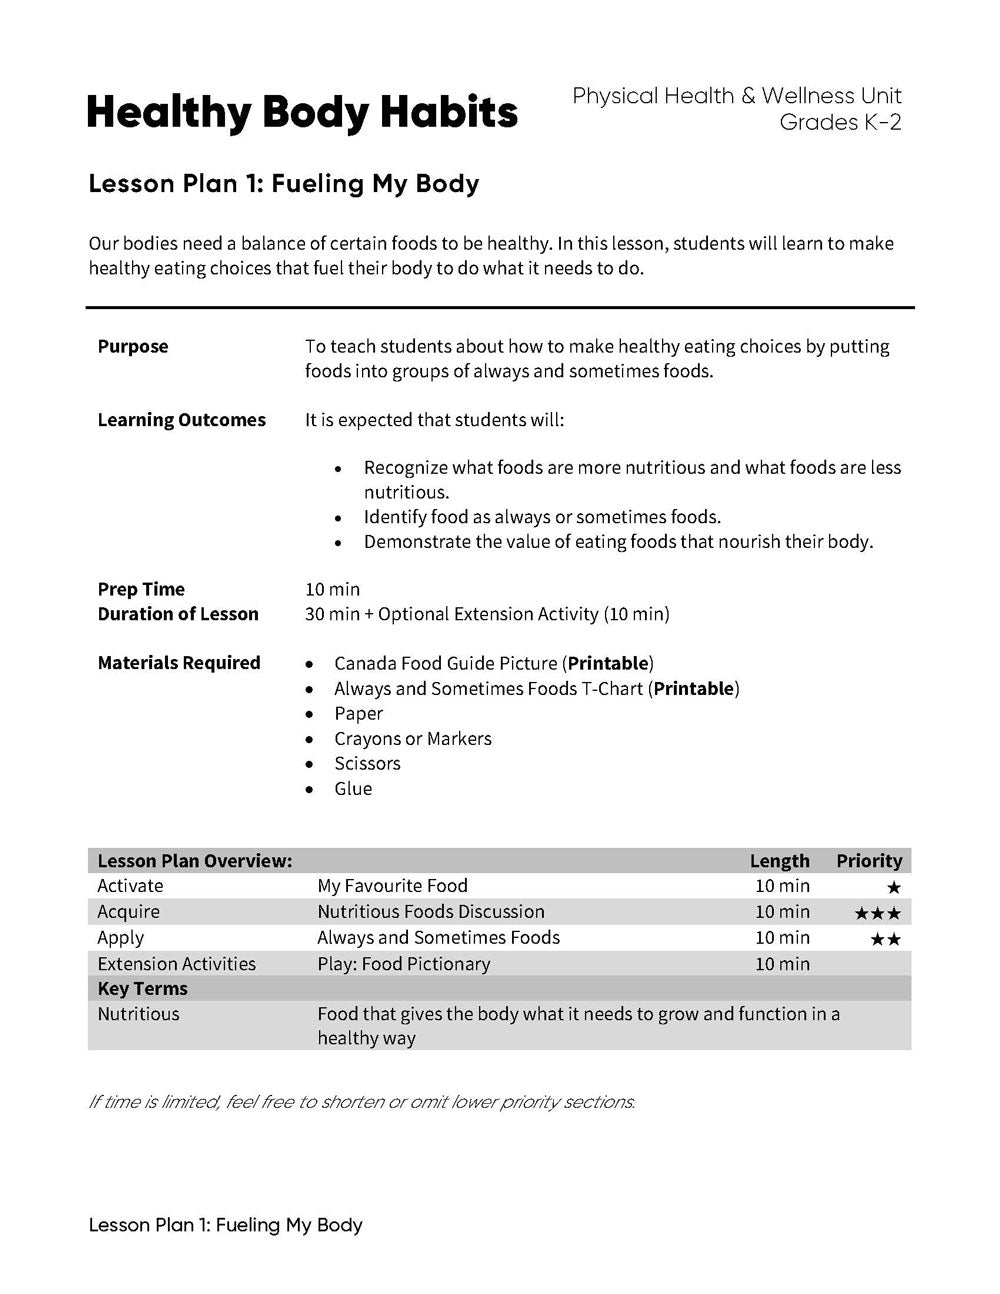 Lesson Plan 1: Fueling My Body